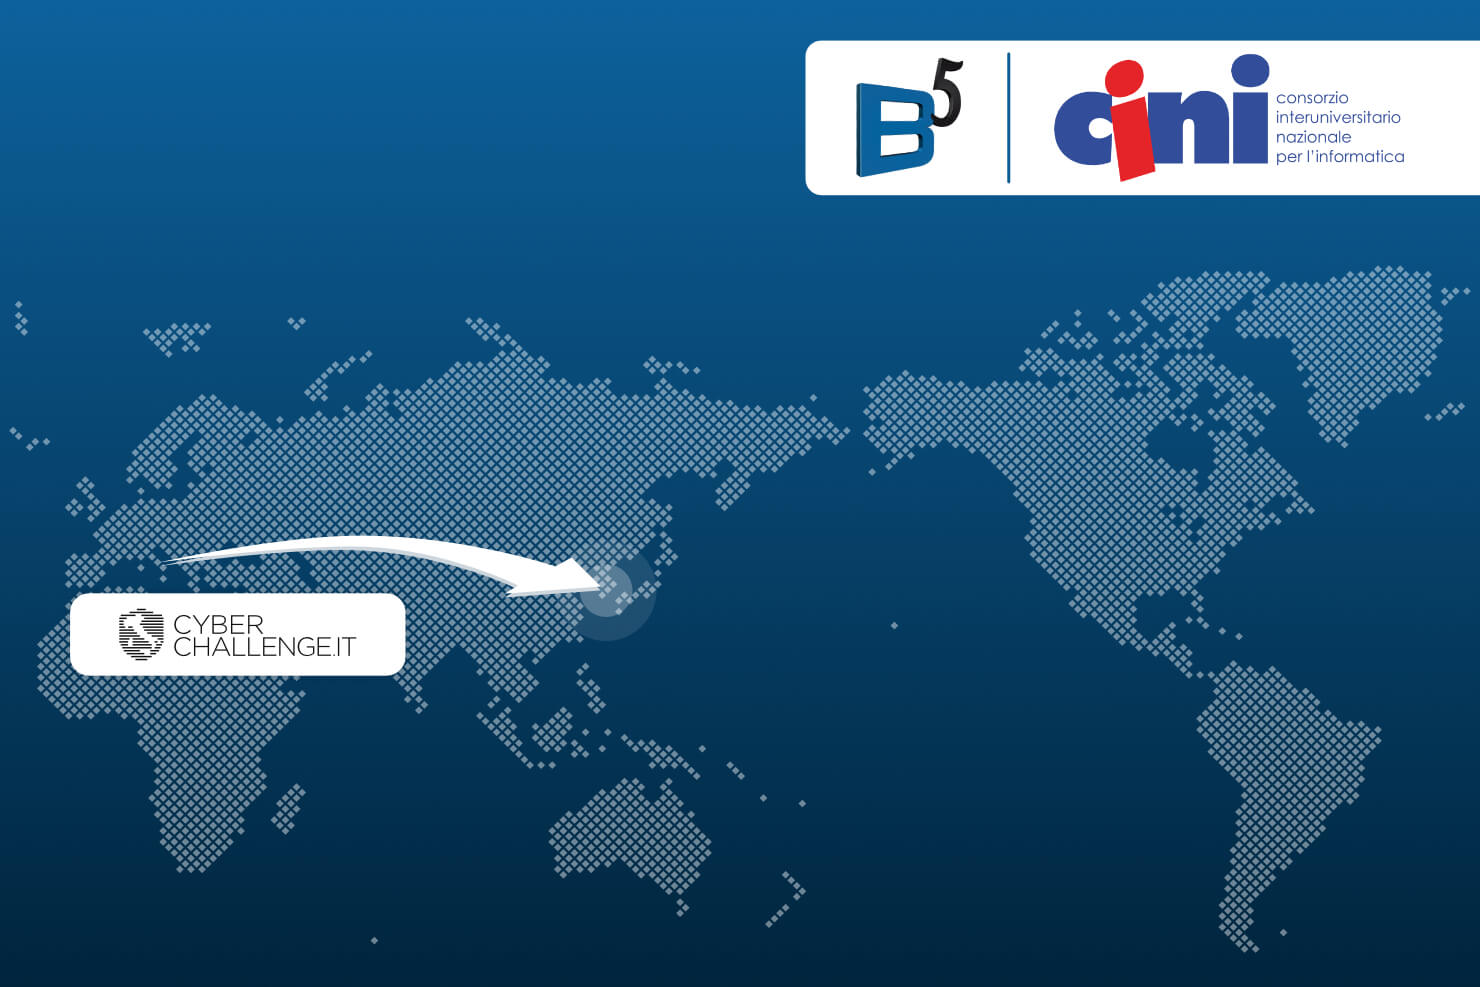 Blu5 is about to export the CyberChallenge format to Asia